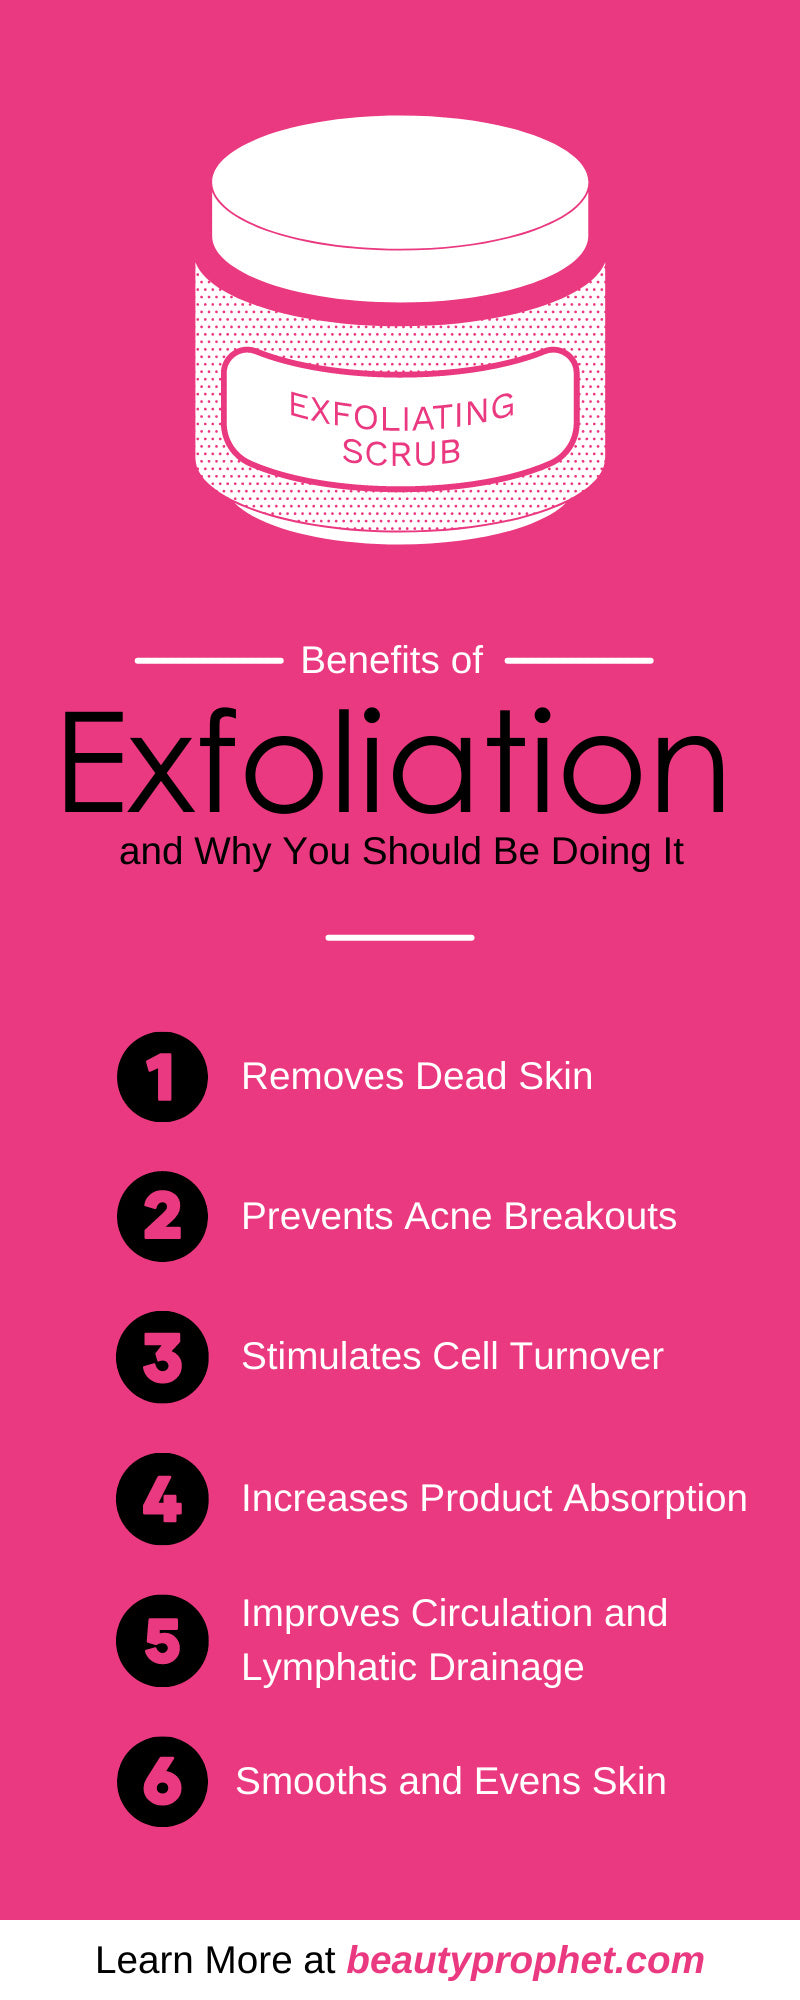 8 Benefits of Exfoliation and Why You Should Be Doing It